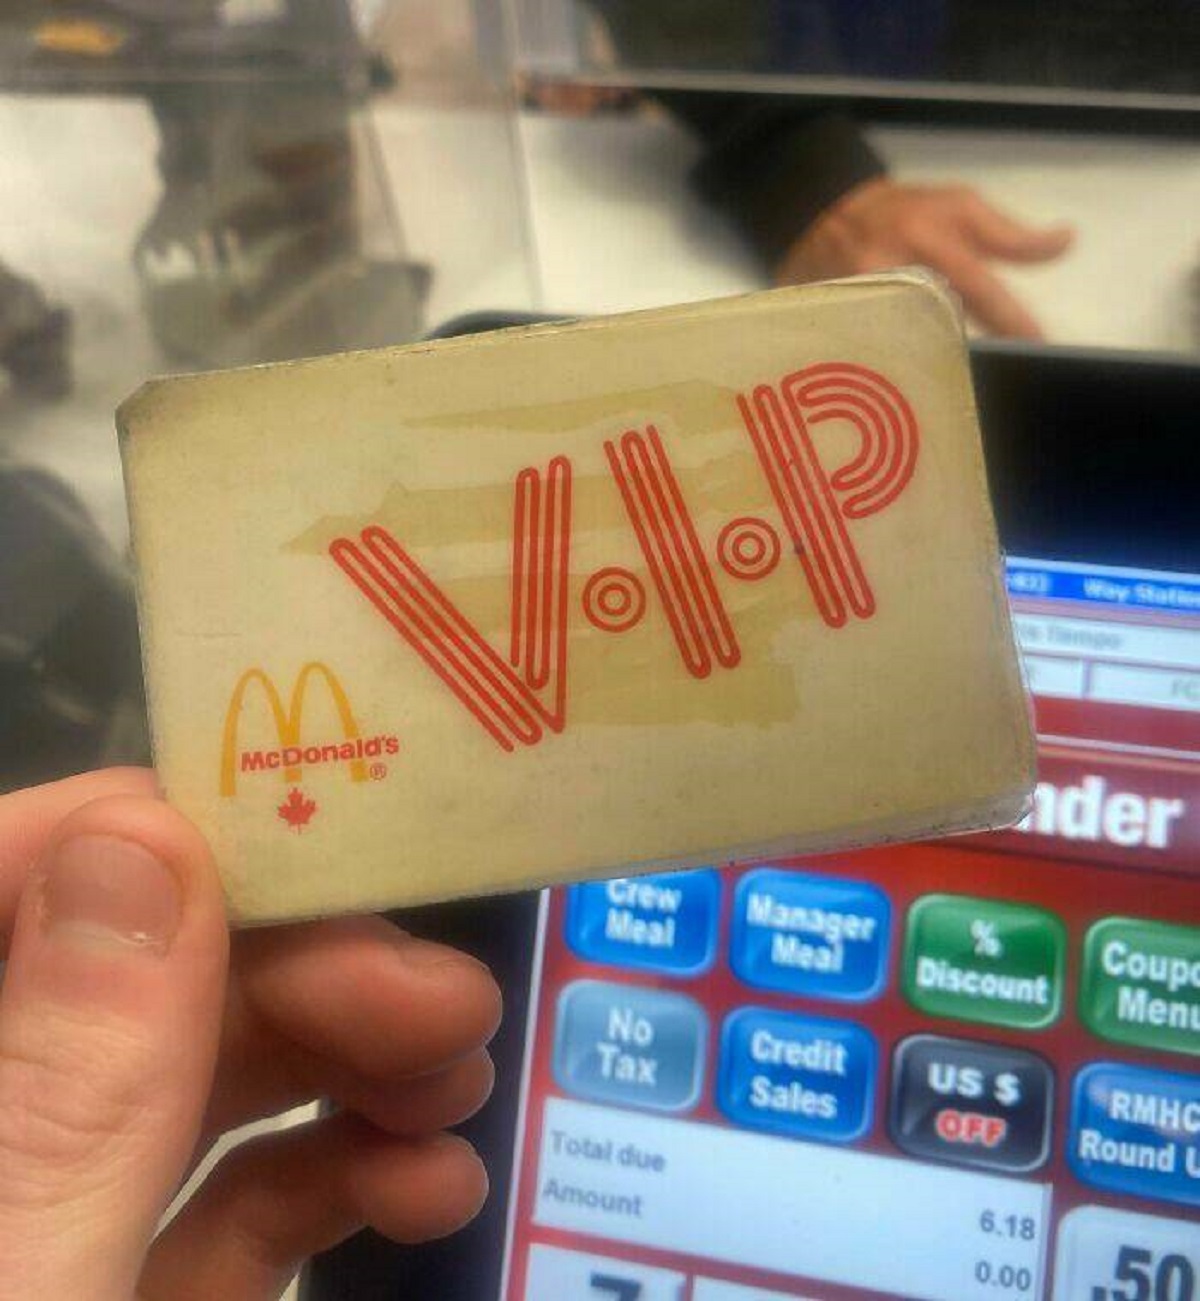 "An Elderly Customer Came In Today With A McDonald's VIP Card"